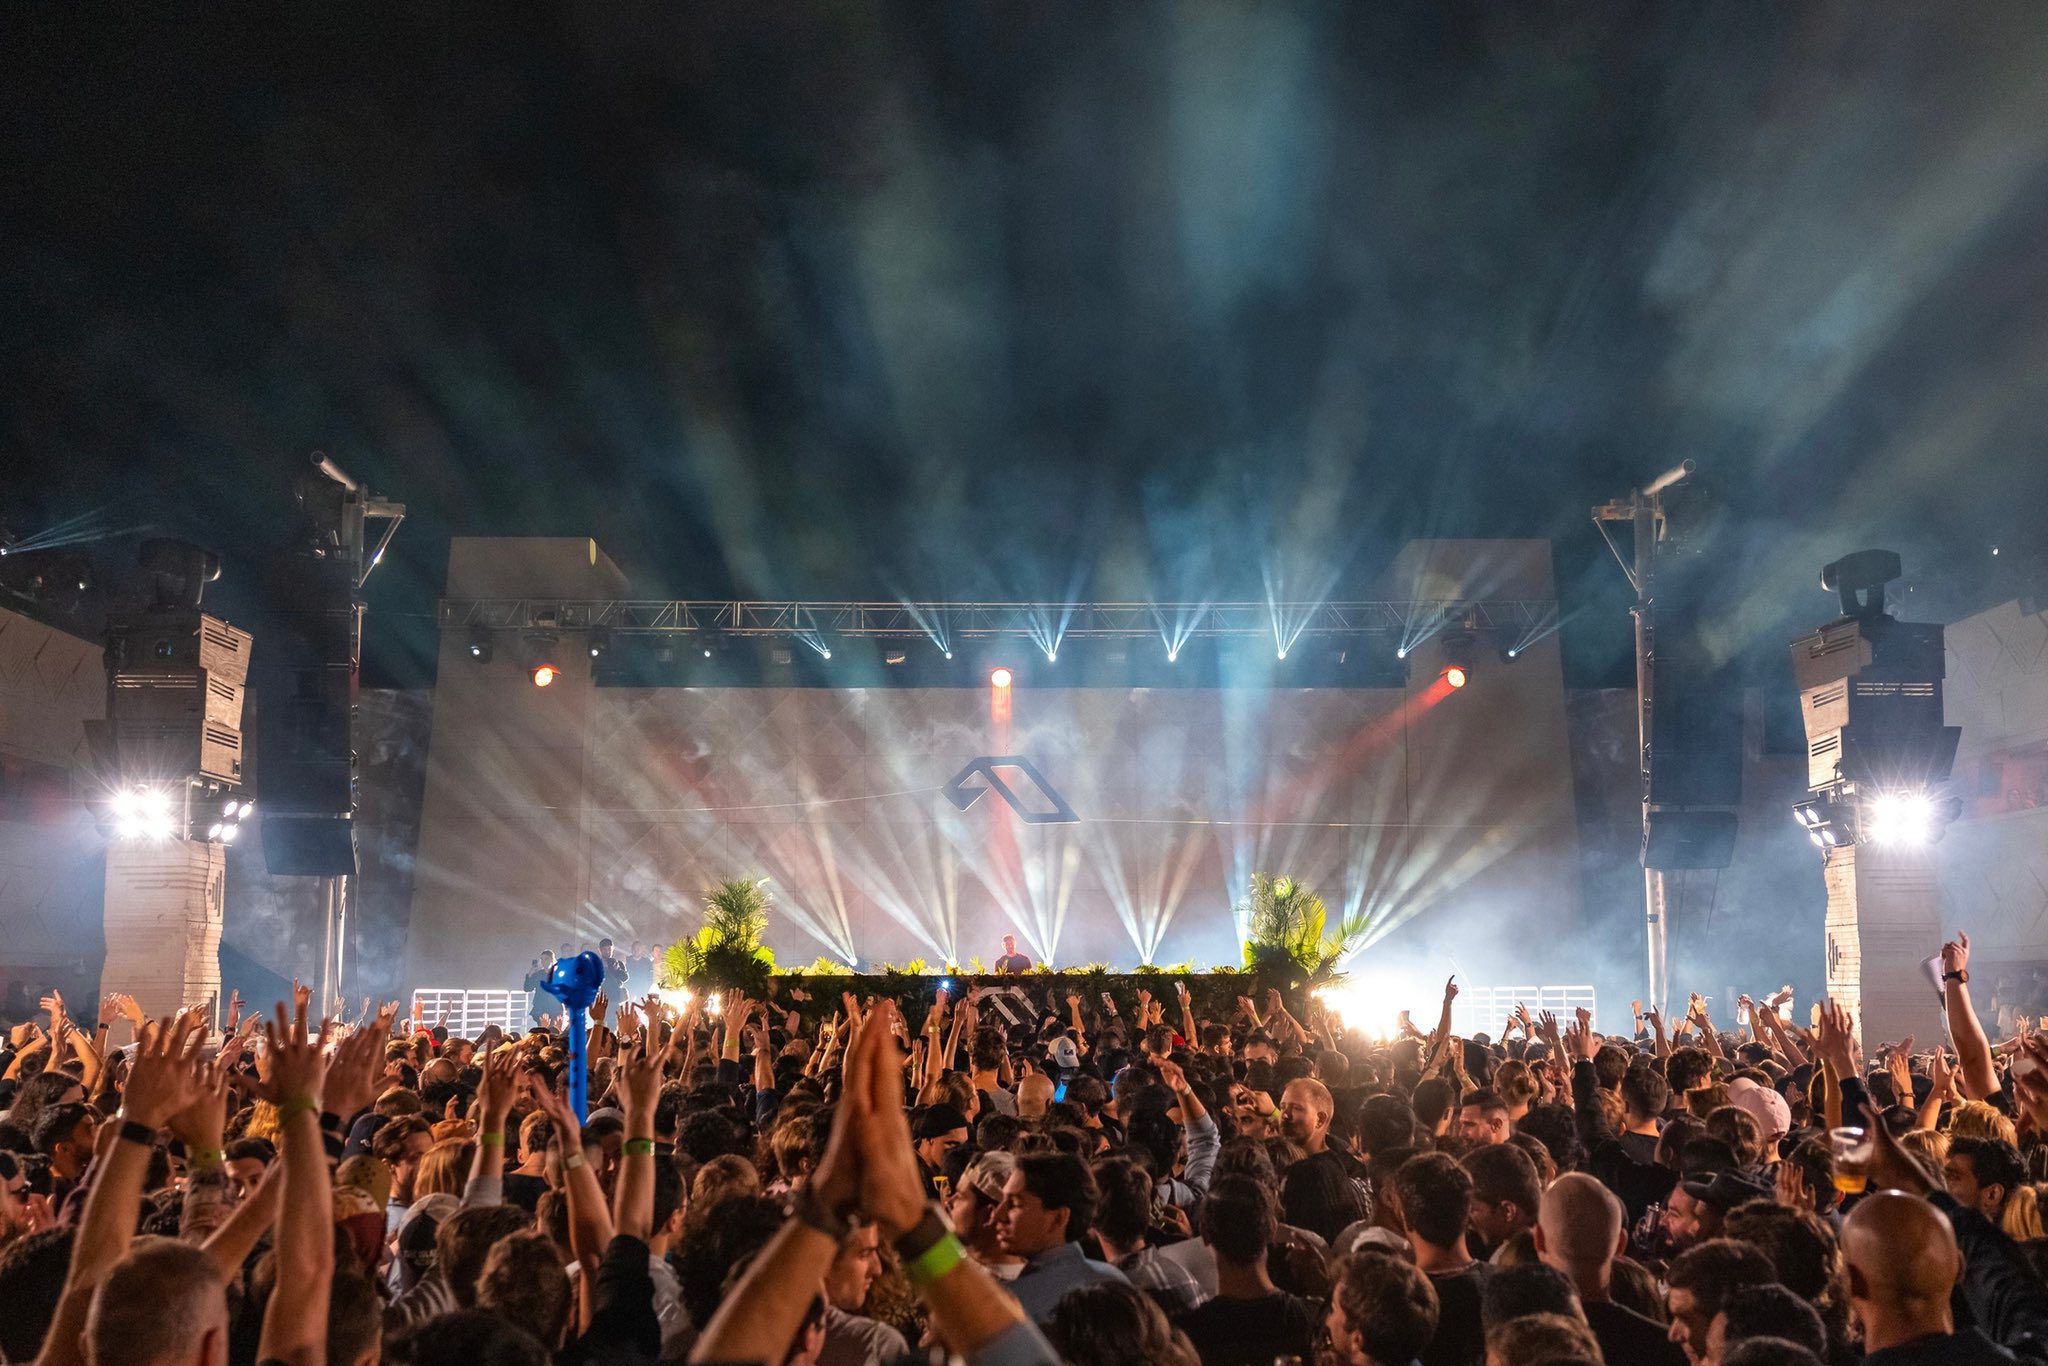 Anjunabeats Returns to the Brooklyn Mirage for a 2-Day Takeover